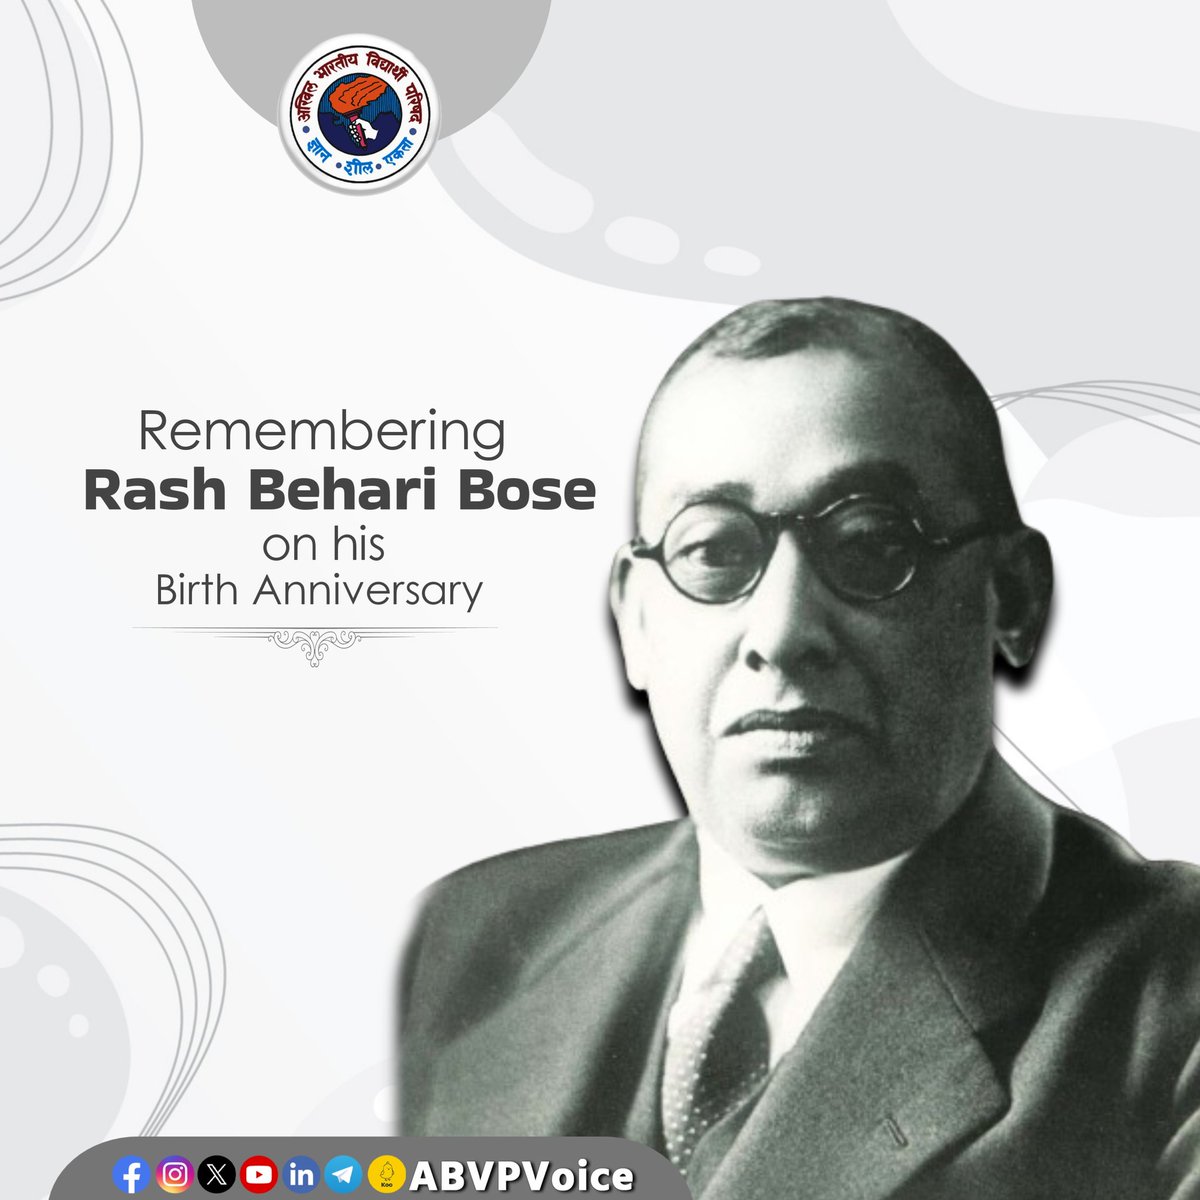 Tributes to Rash Behari Bose Ji on his birth anniversary. His role in founding the Azad Hind Fauj was pivotal in Bharat's struggle for independence. His relentless pursuit of independence and his strategic genius were instrumental in our freedom movement.